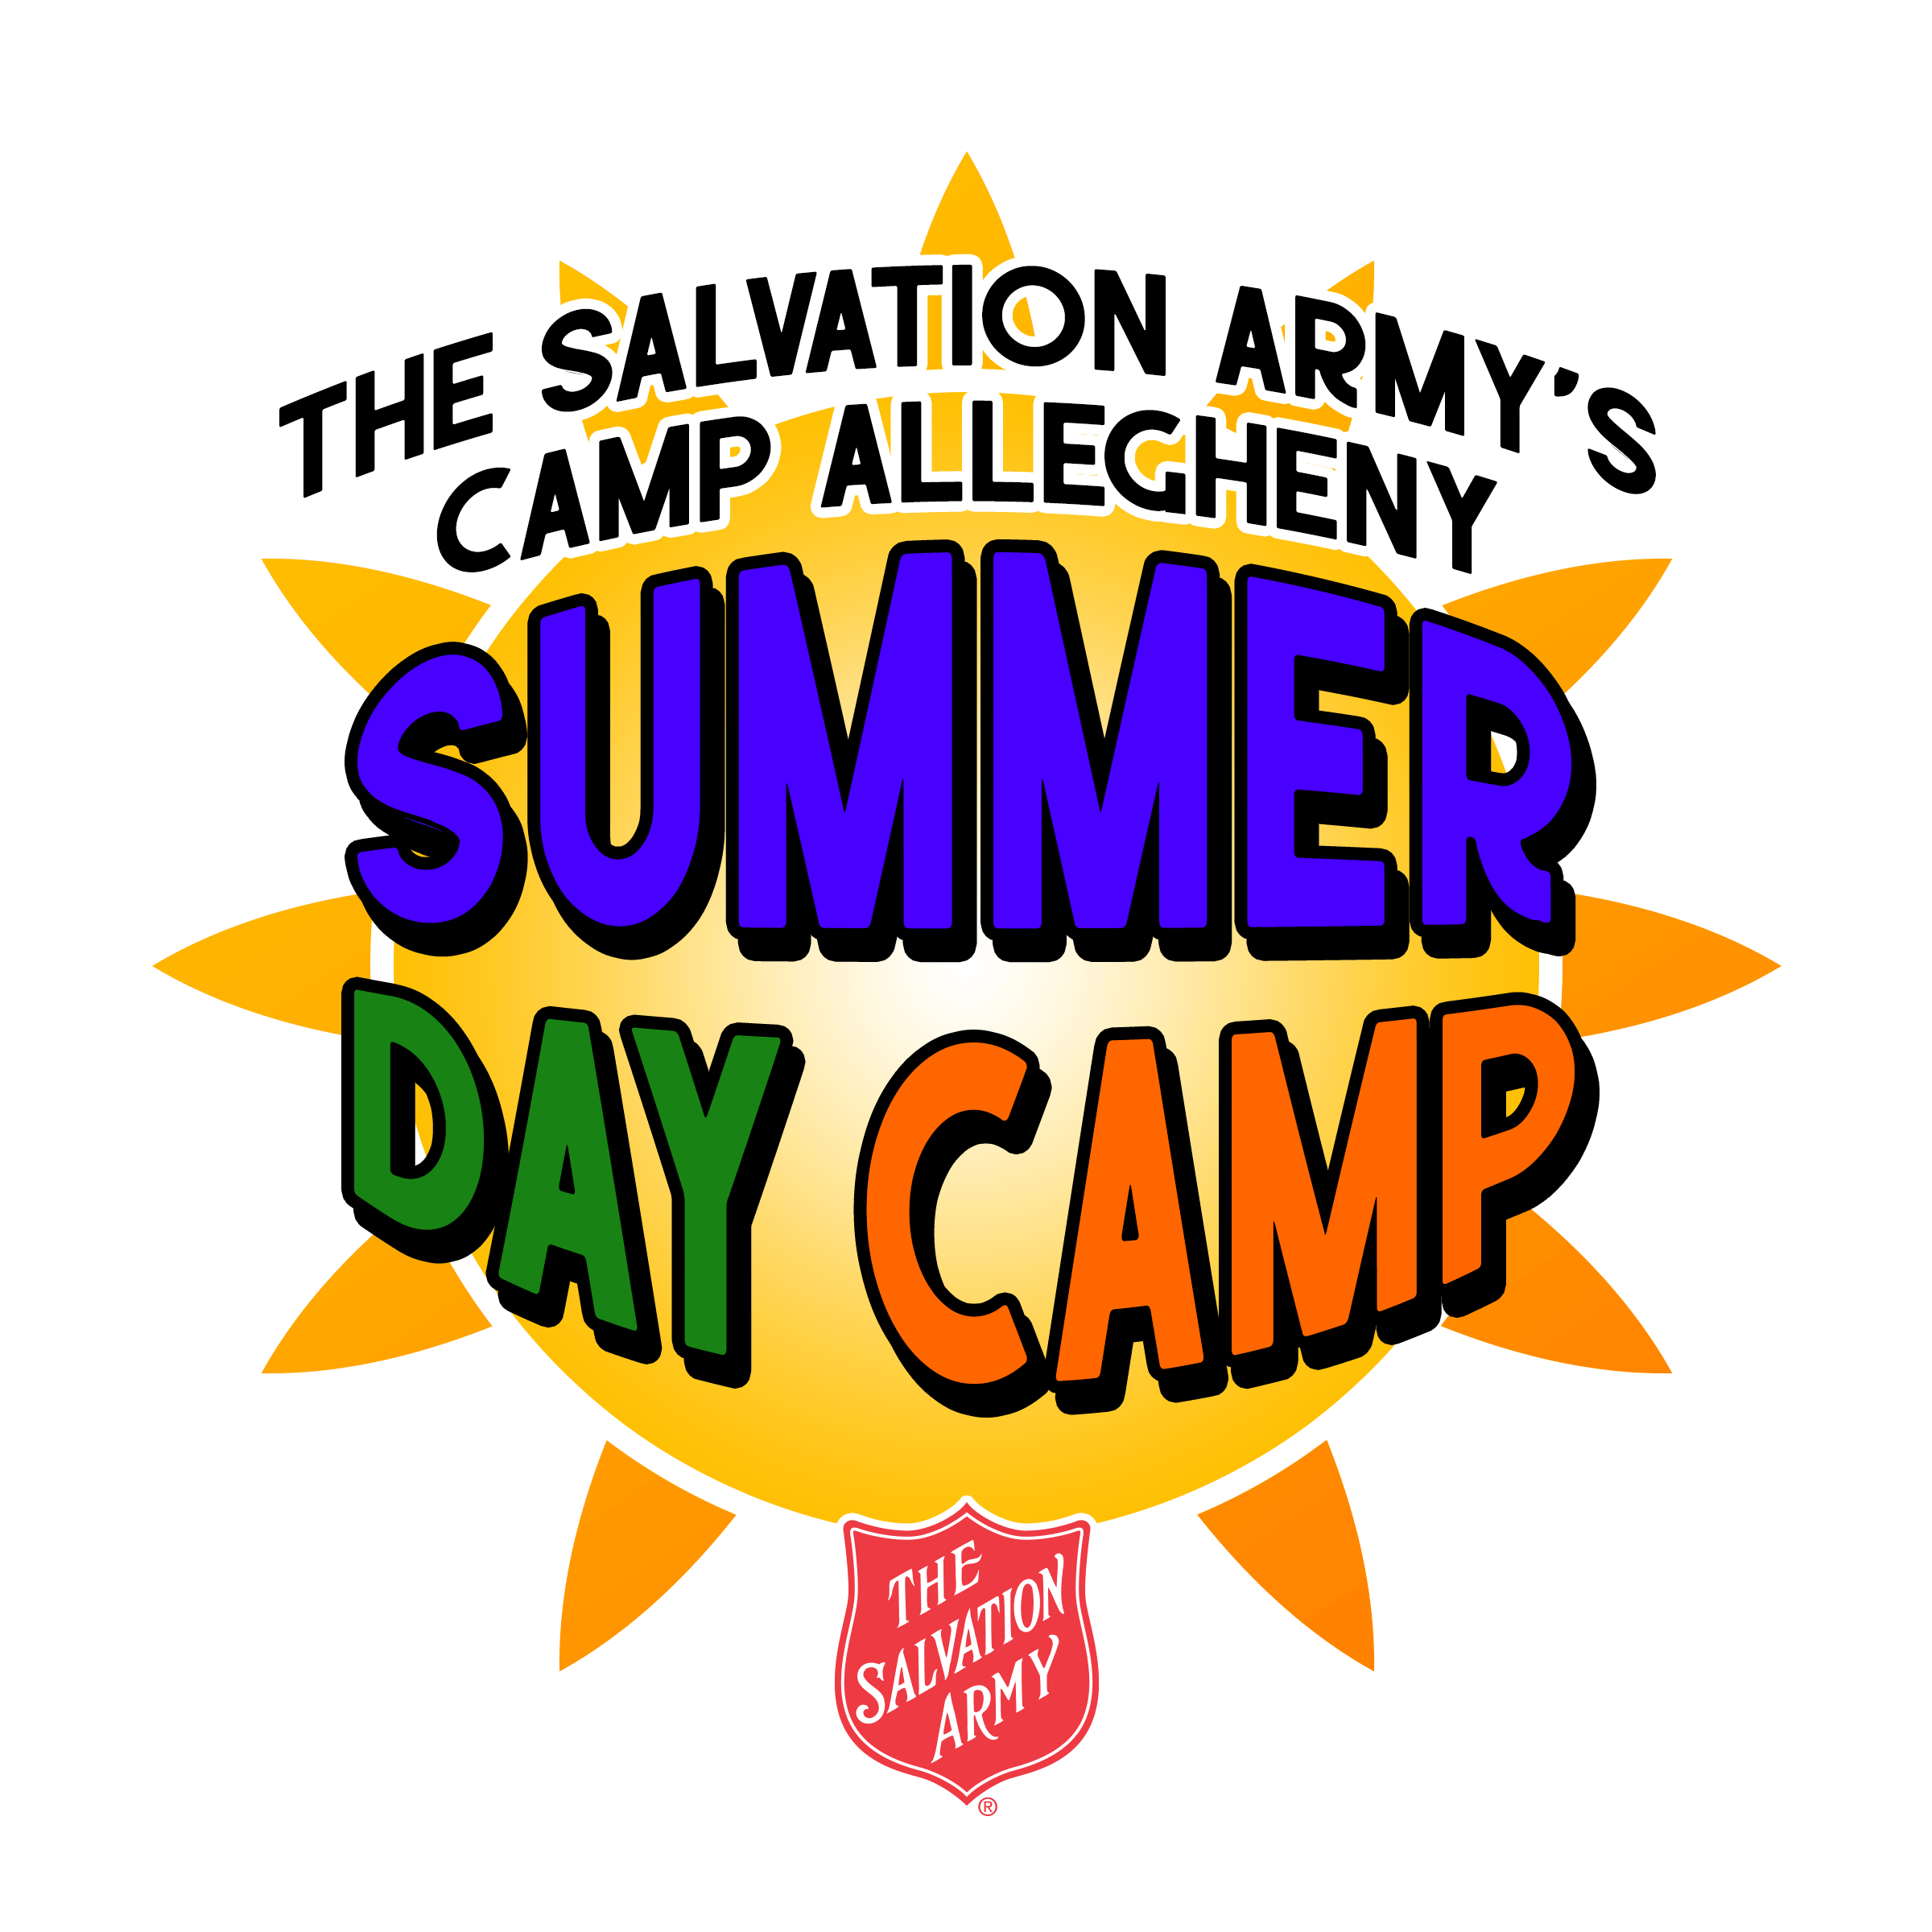 Summer Day Camp Logo - Summer Day Camp – The Salvation Army's Camp Allegheny